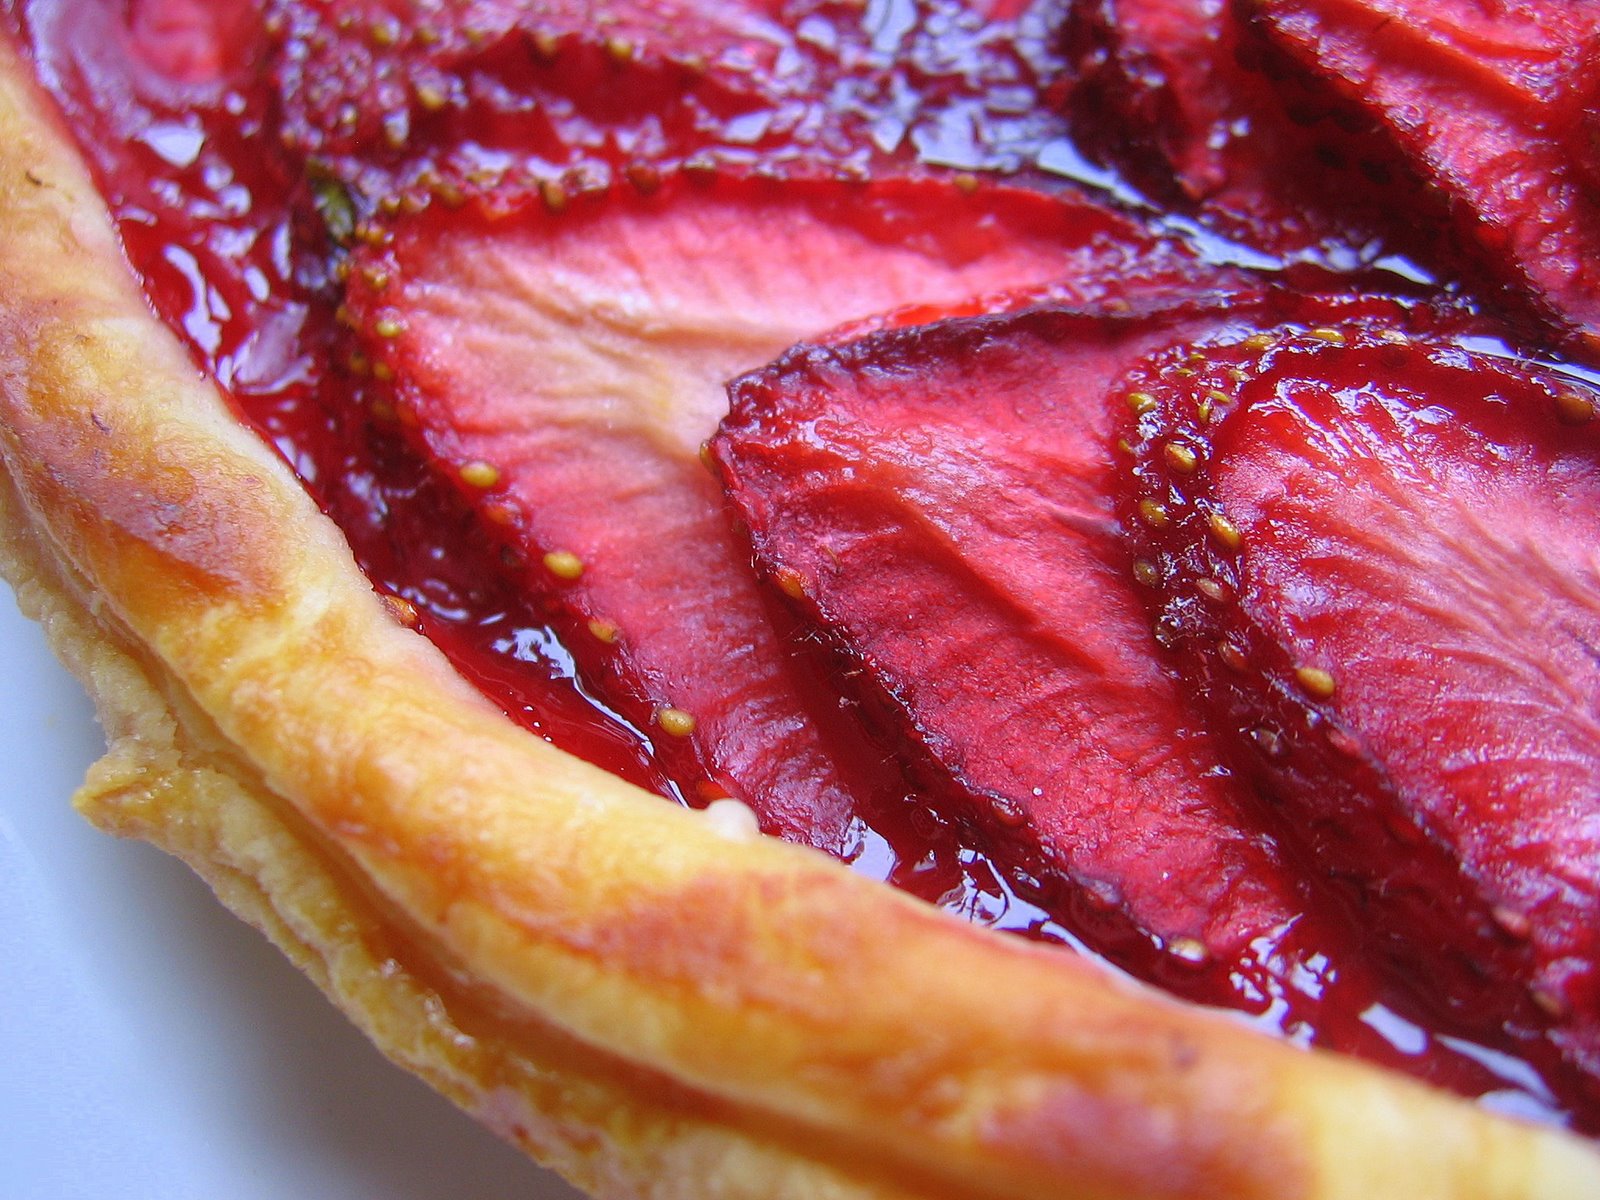 Back indoors with Strawberry Galette